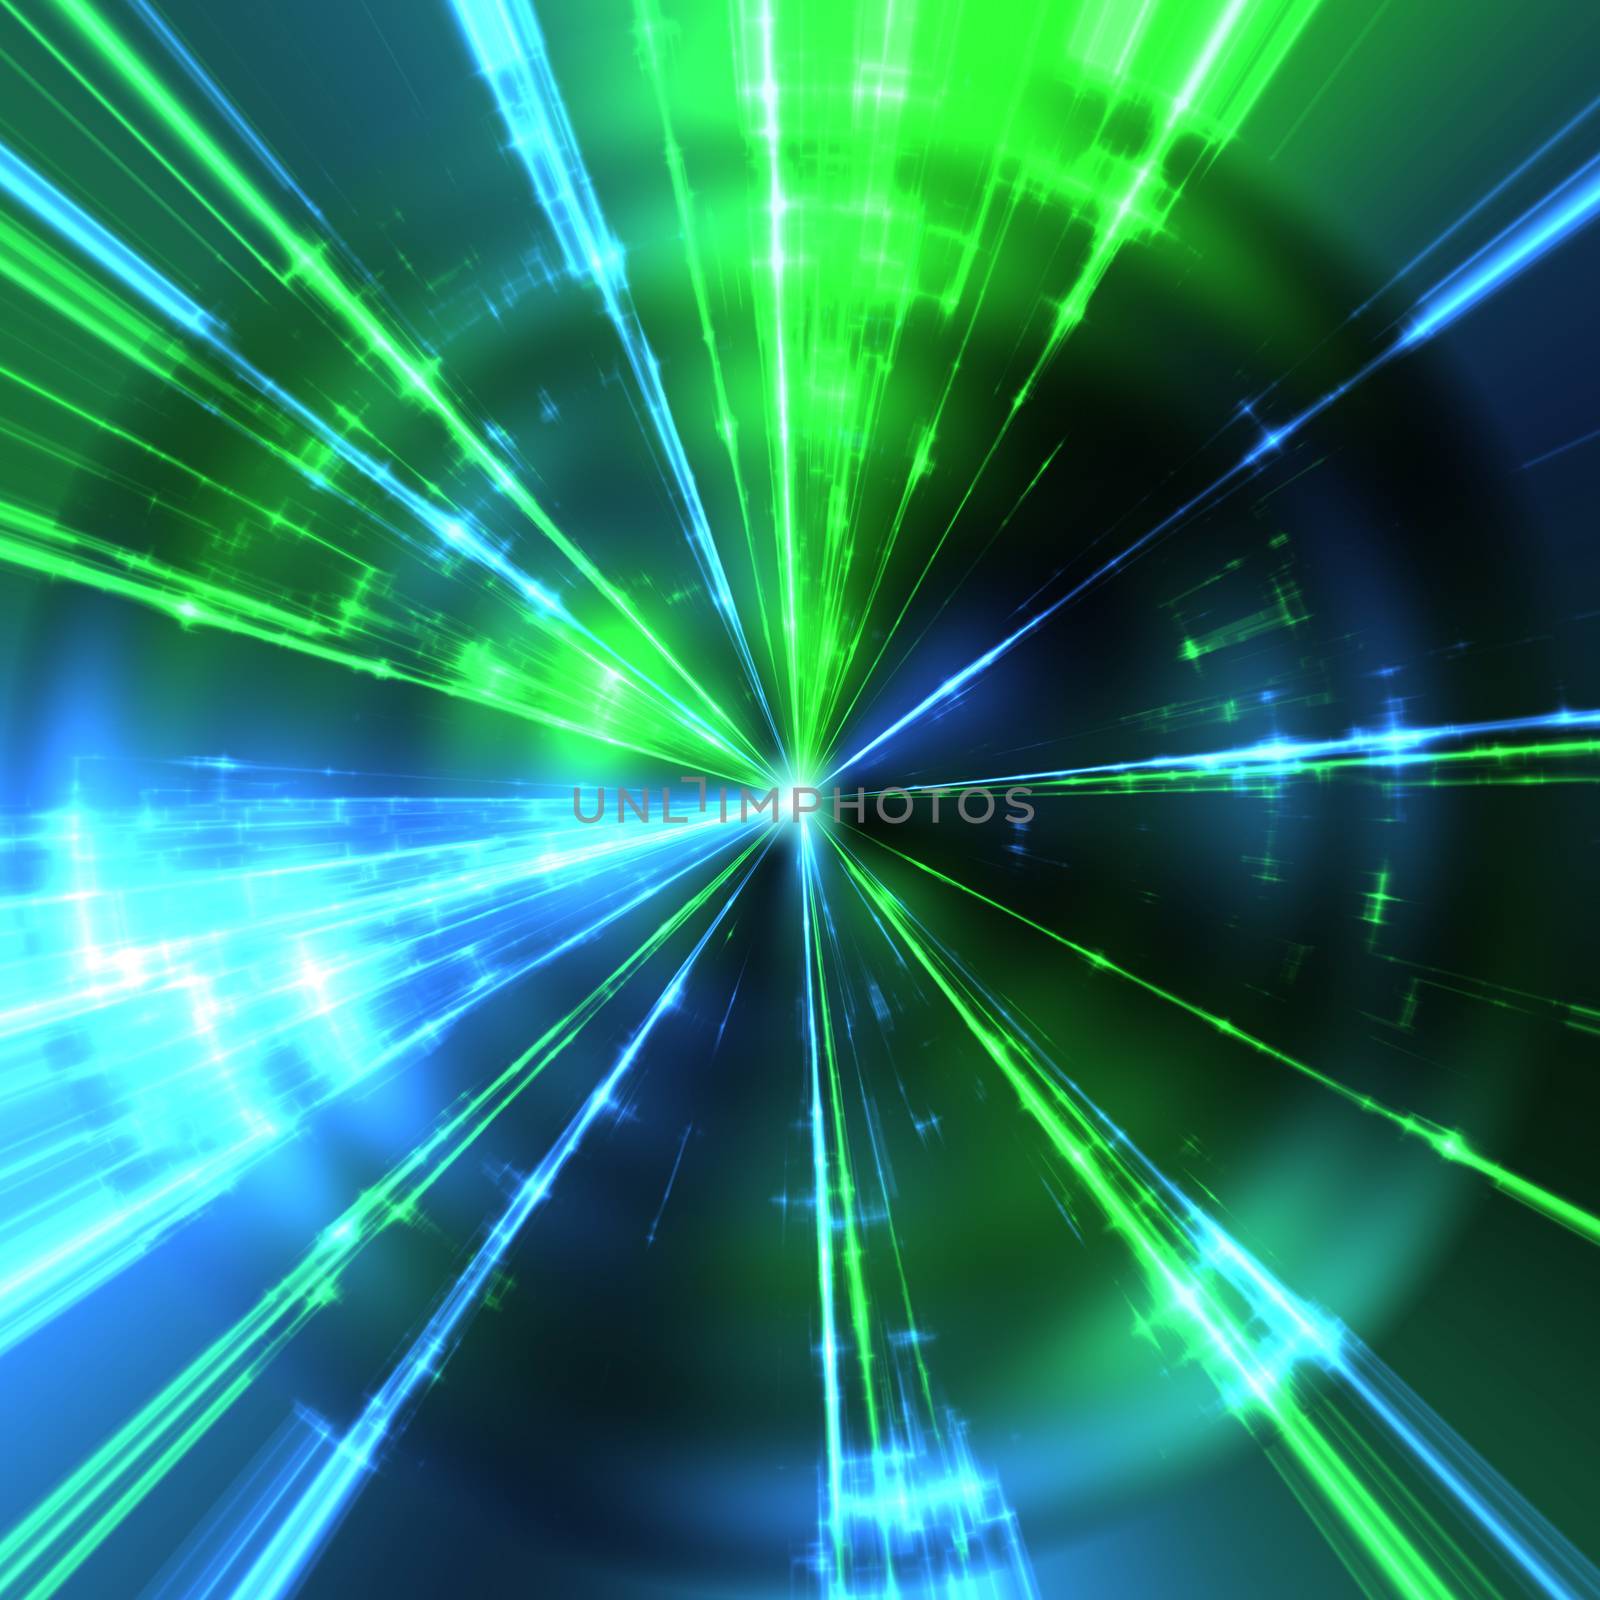 Illustration of some green and blue laser rays